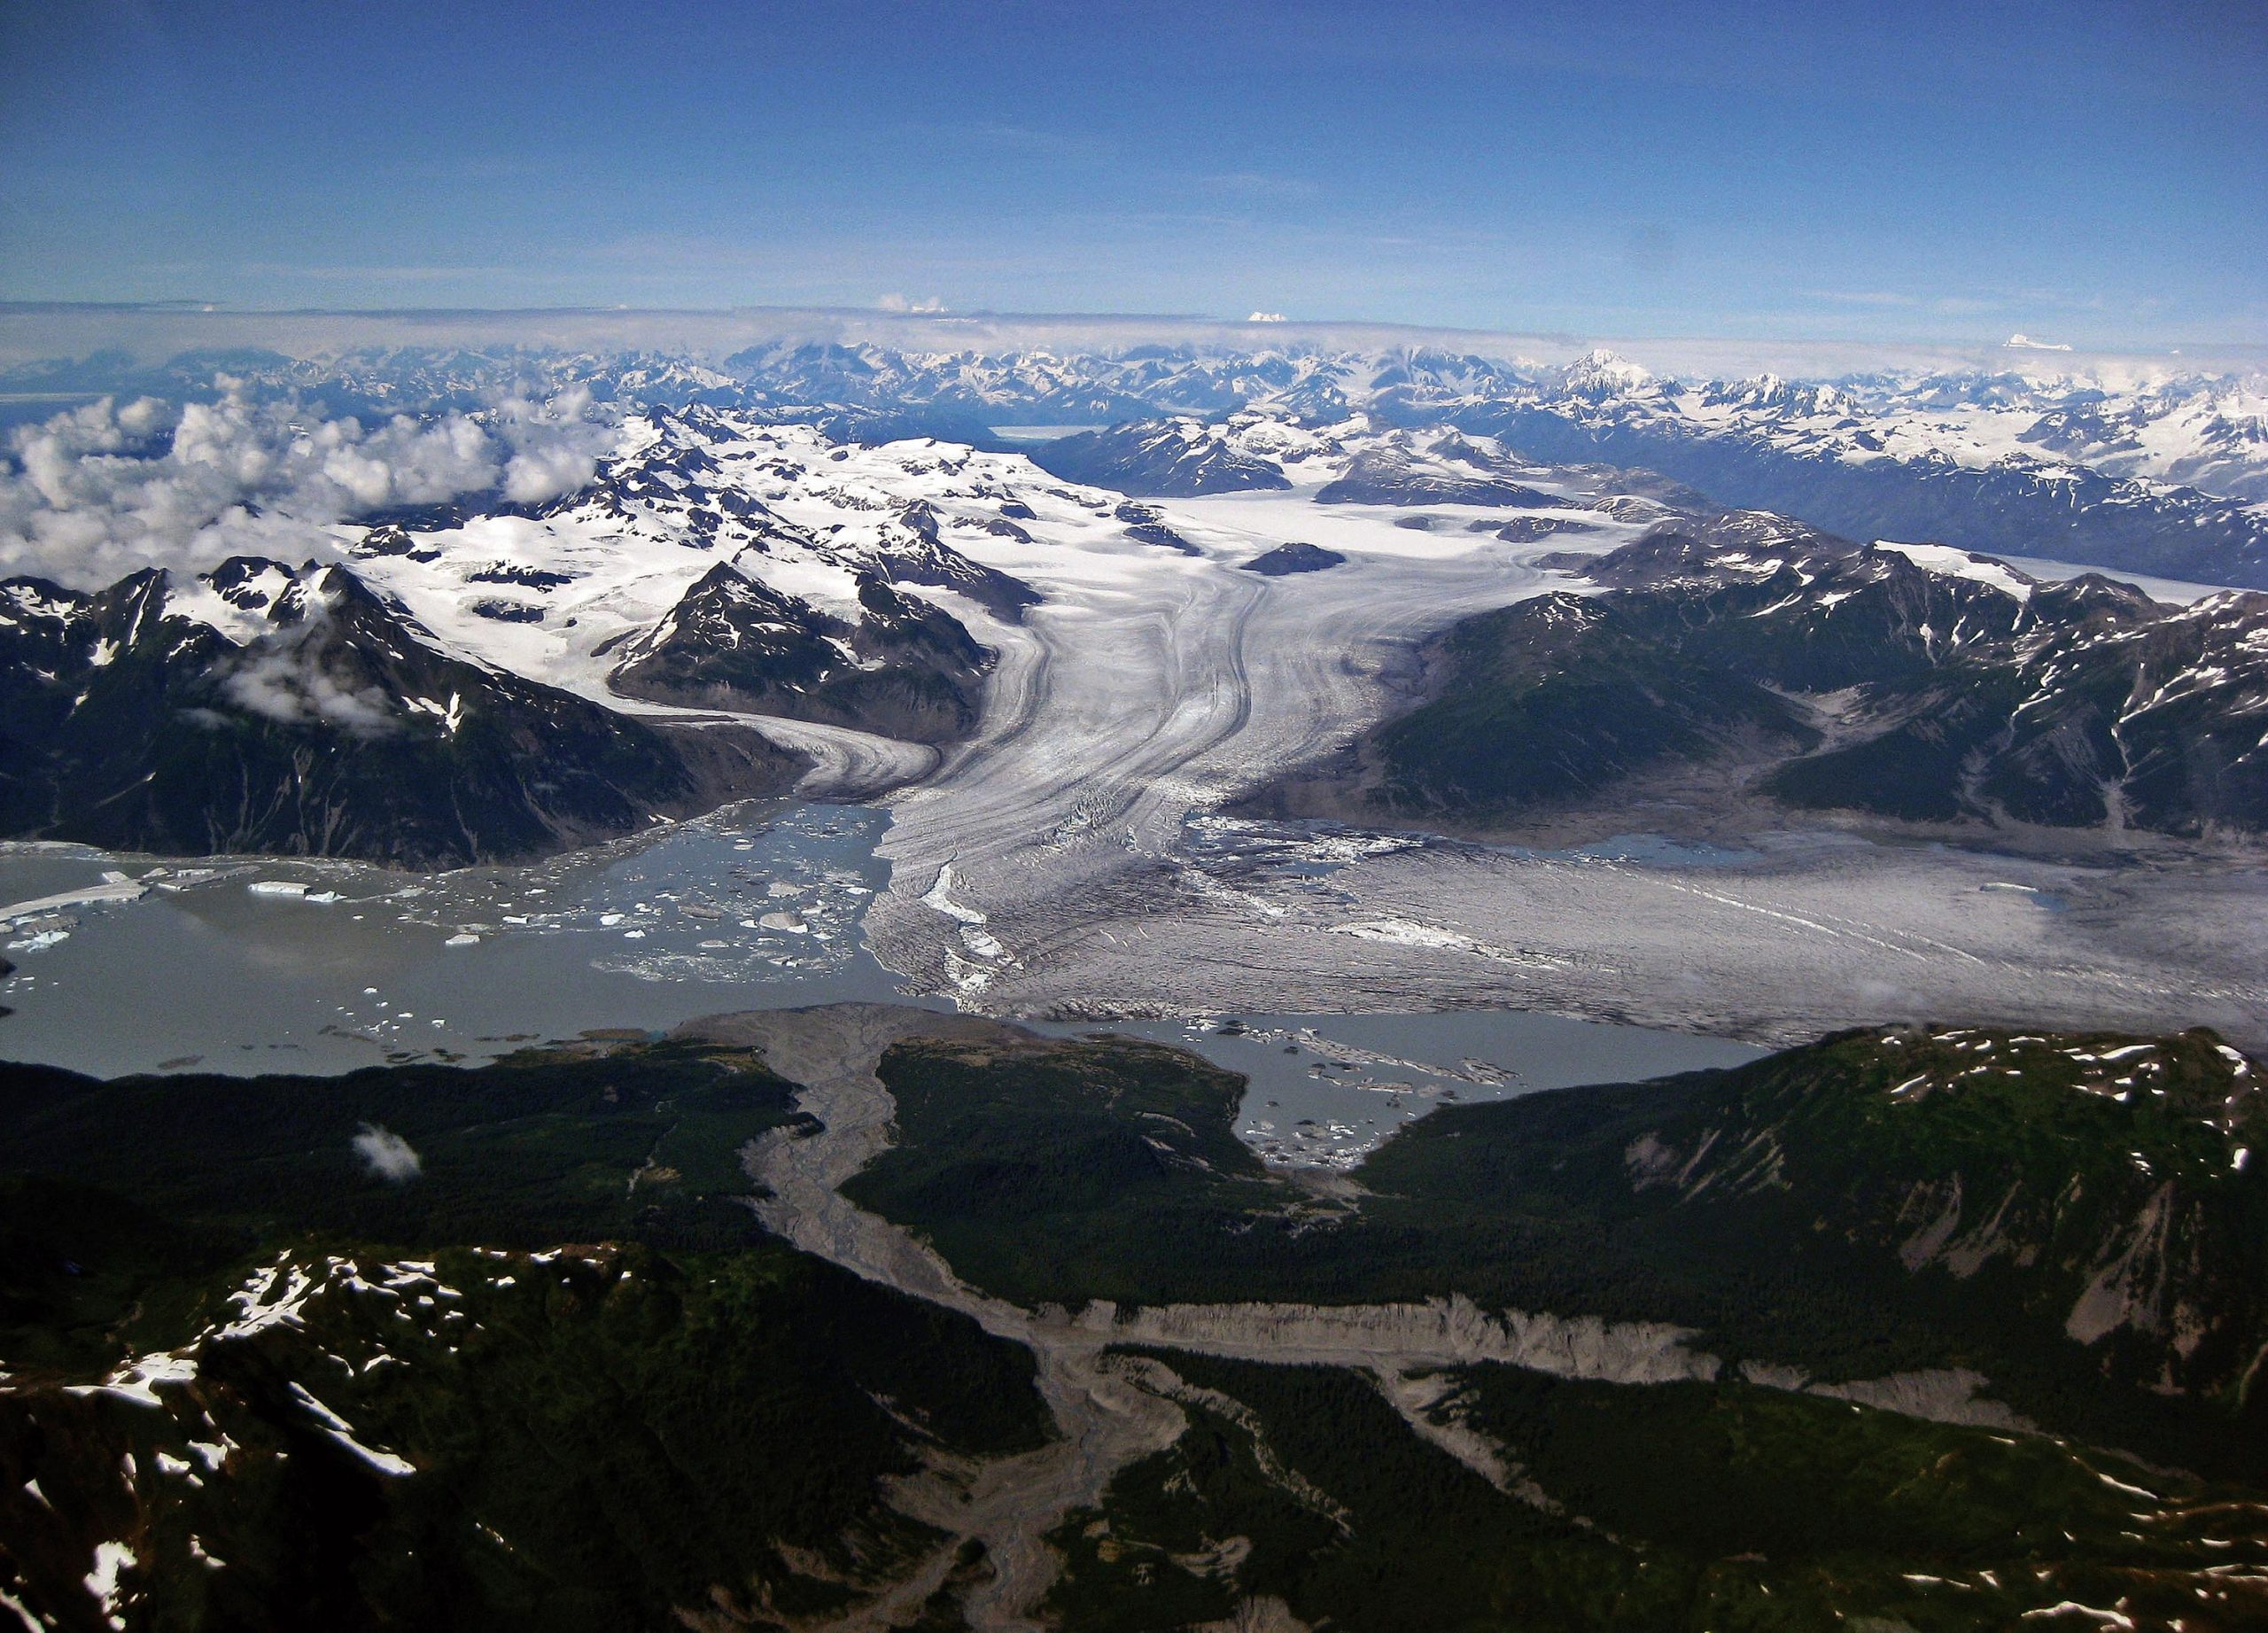 Melting glaciers contribute to earthquakes in Alaska, causing soil to rise 1.5 inches per year